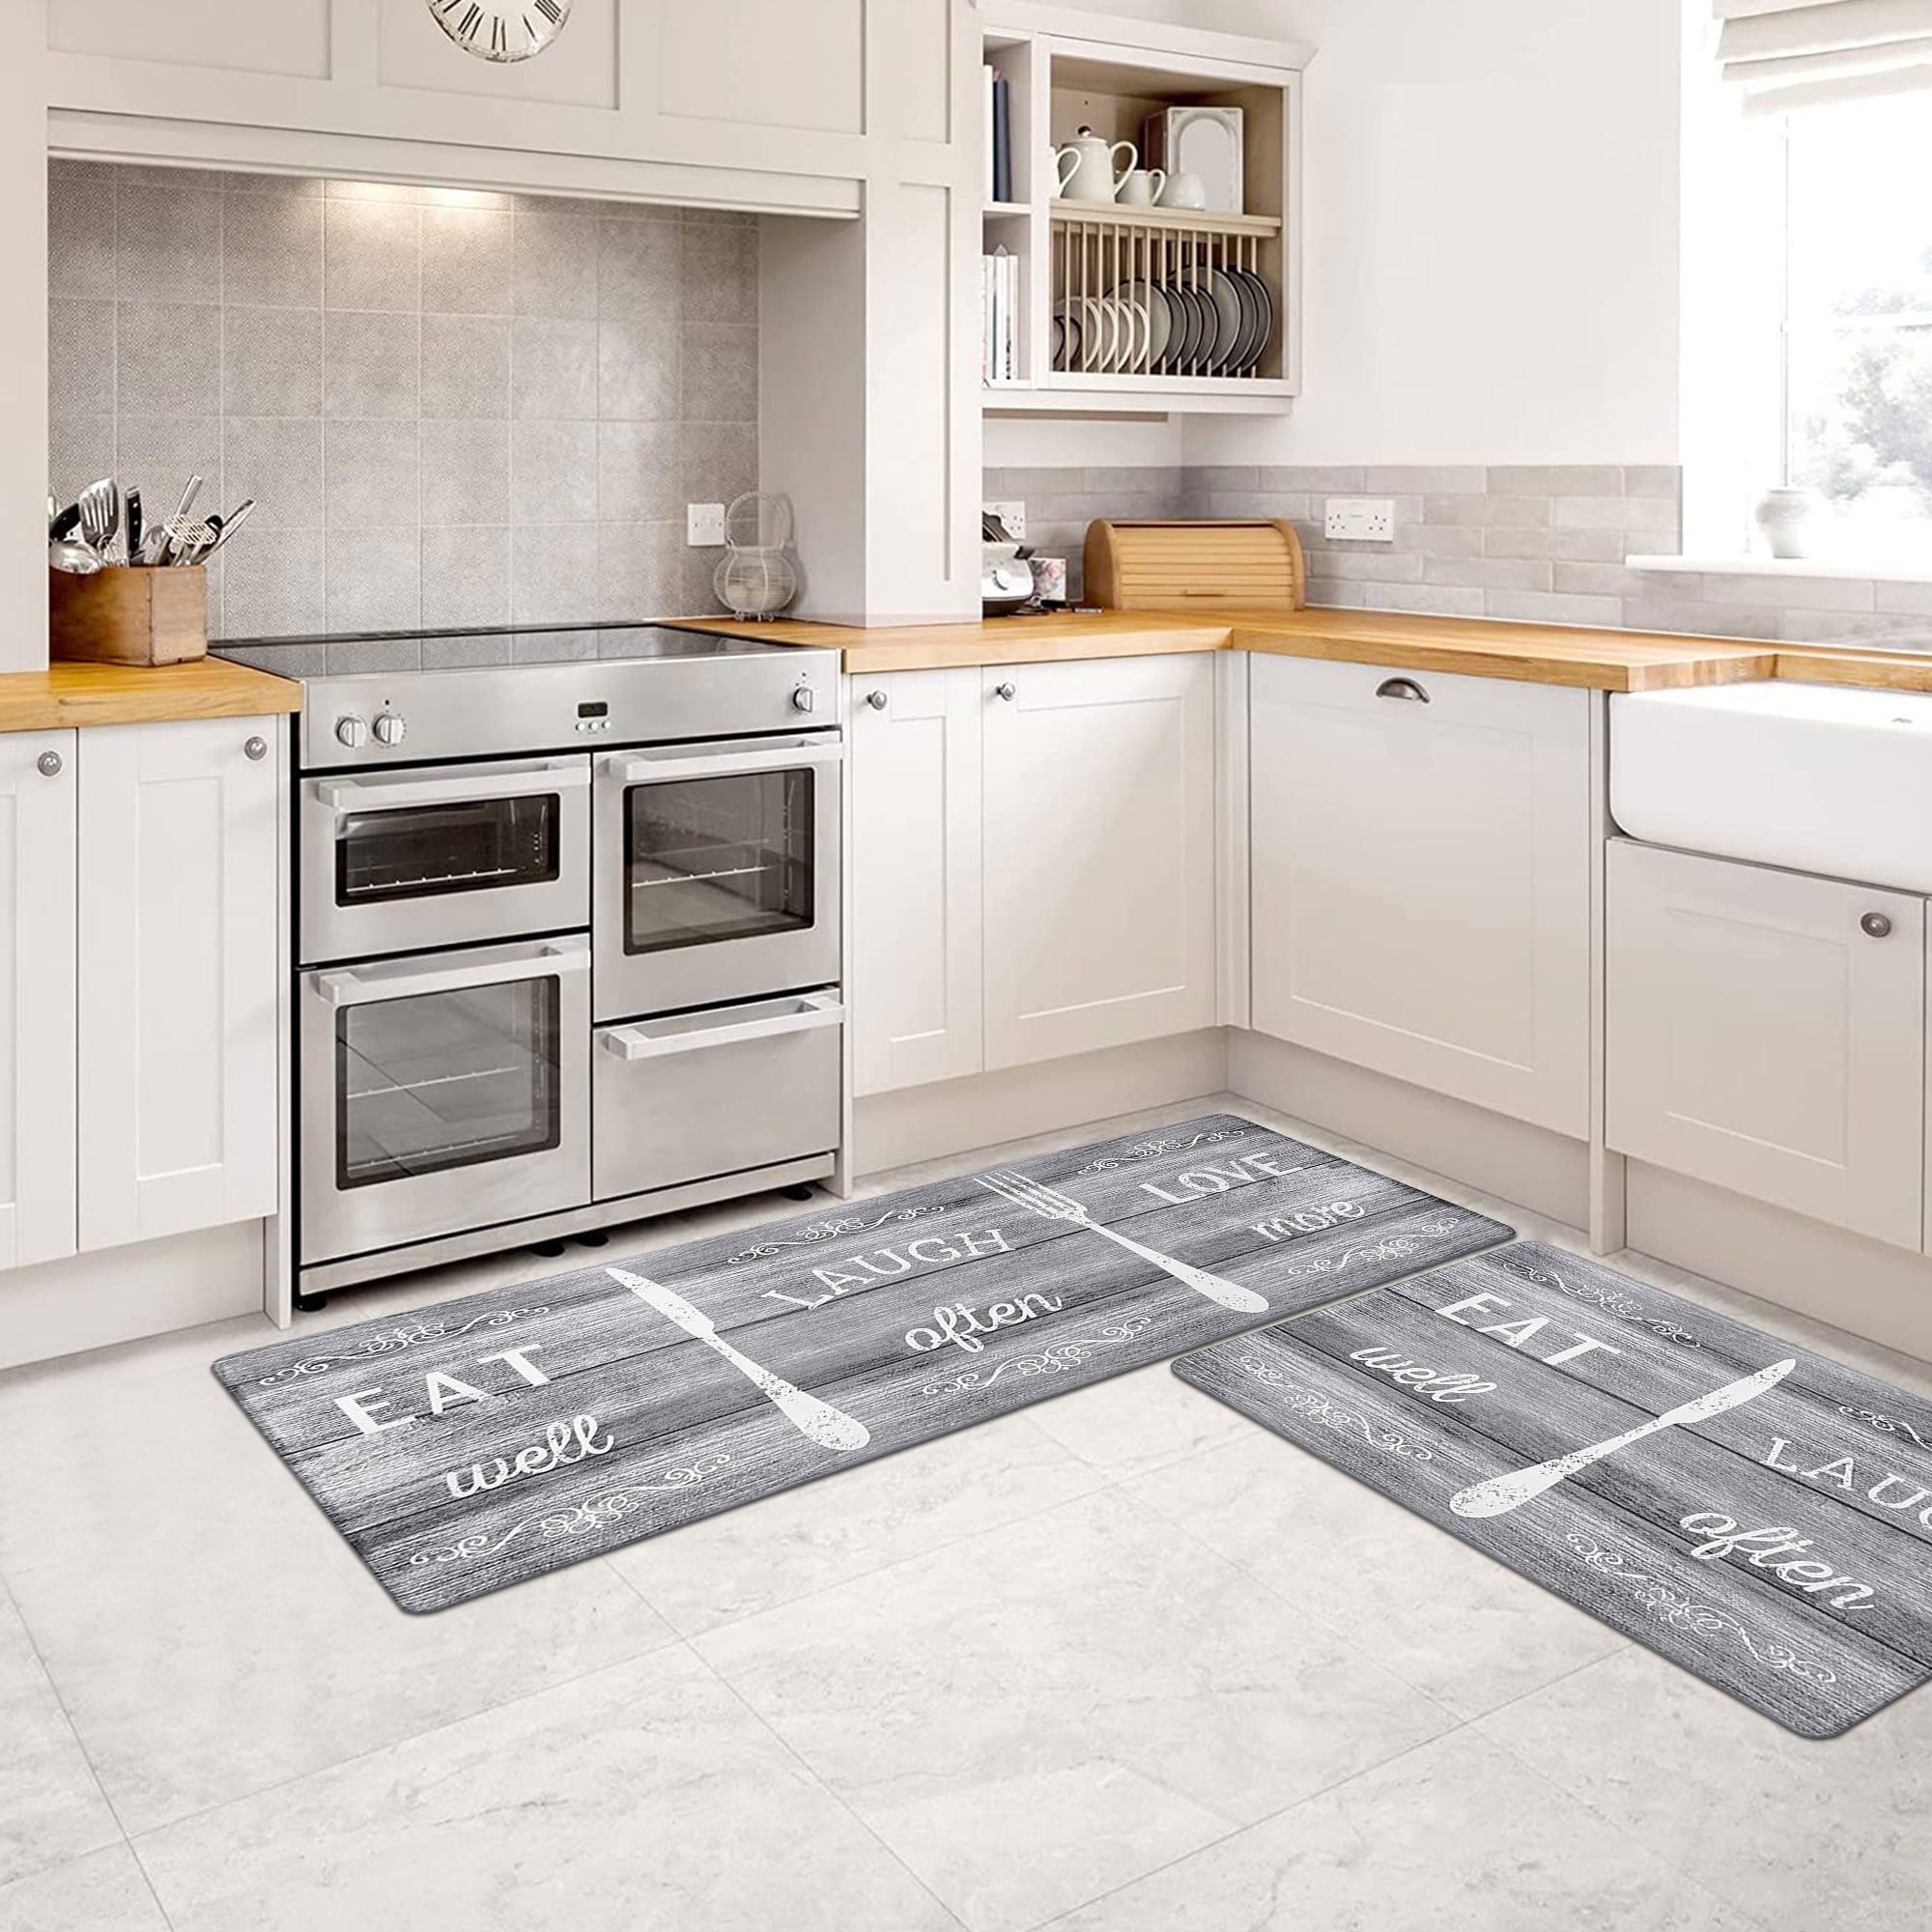  ROTTOGOON Kitchen Floor Mat Set of 2, Cushioned Anti Fatigue  Kitchen Mat 17x47+17x29, Non-Slip Waterproof Kitchen Rug, Premium PVC  Comfort Kitchen Mats and Rugs for Kitchen, Office, Home, Laundry: Home 